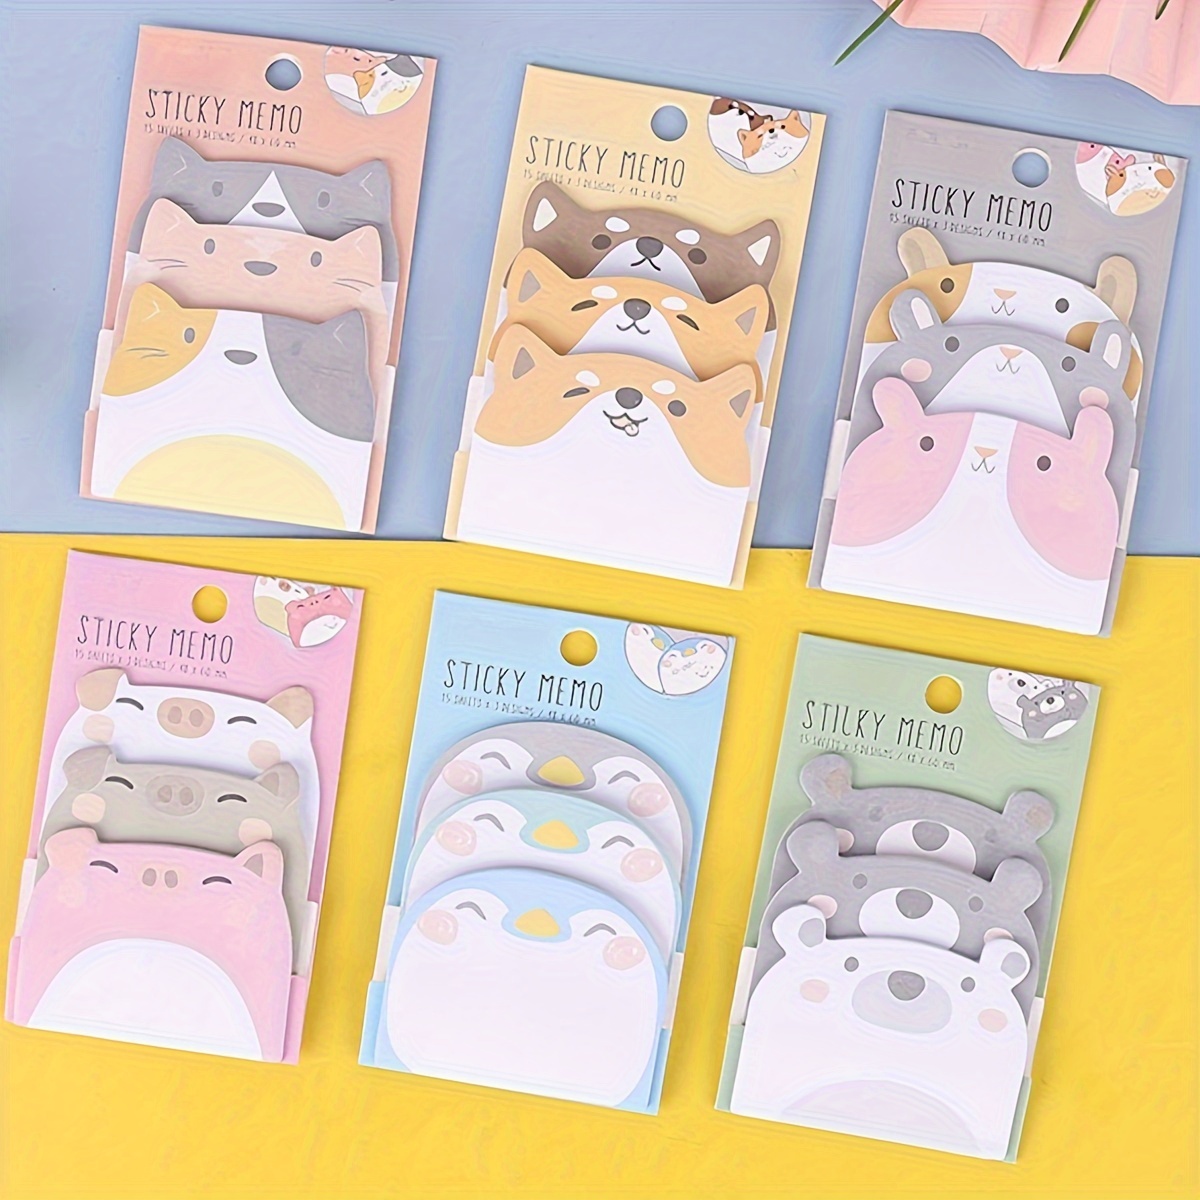 A Pack Of Creative Sticky Note Paper Cute Animal Shaped Sticky Note Cartoon N Times Sticky Note Book 15 Pages*3